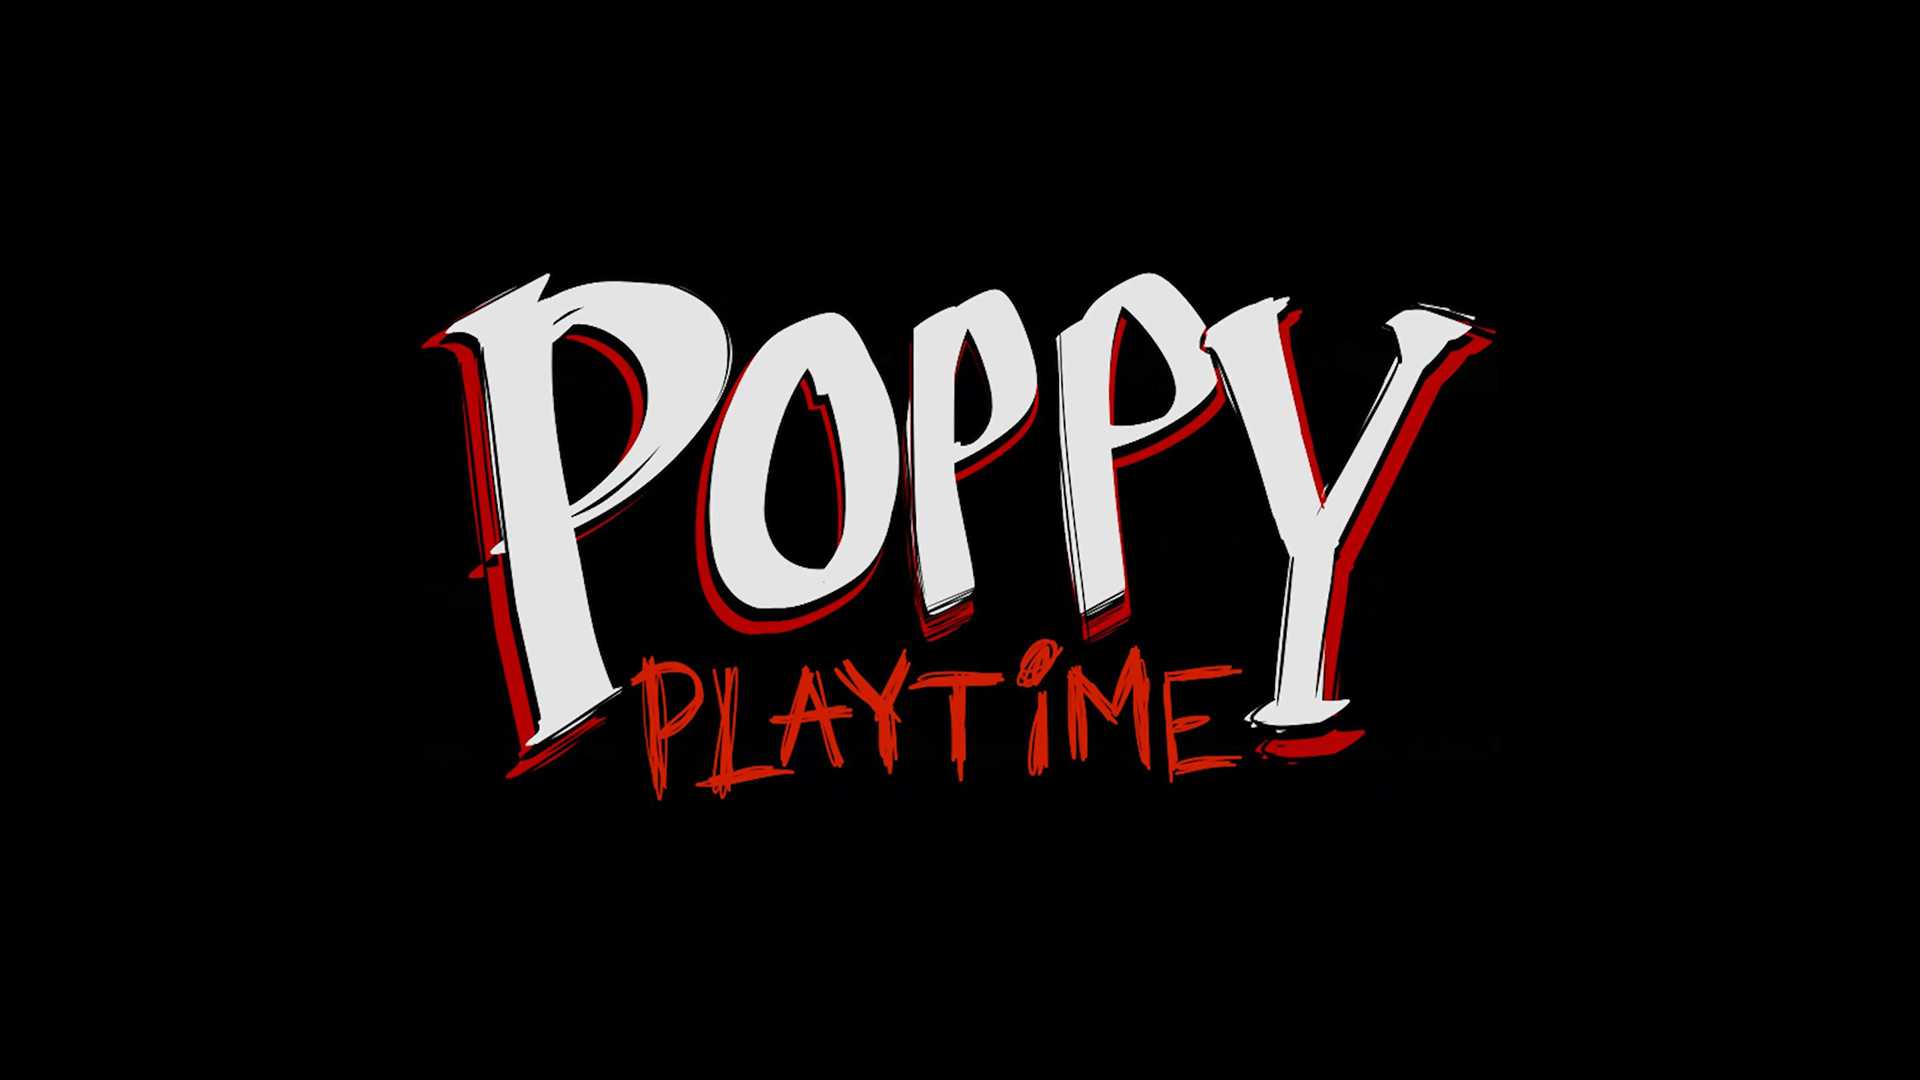 Poppy Playtime Wallpapers   iXpap